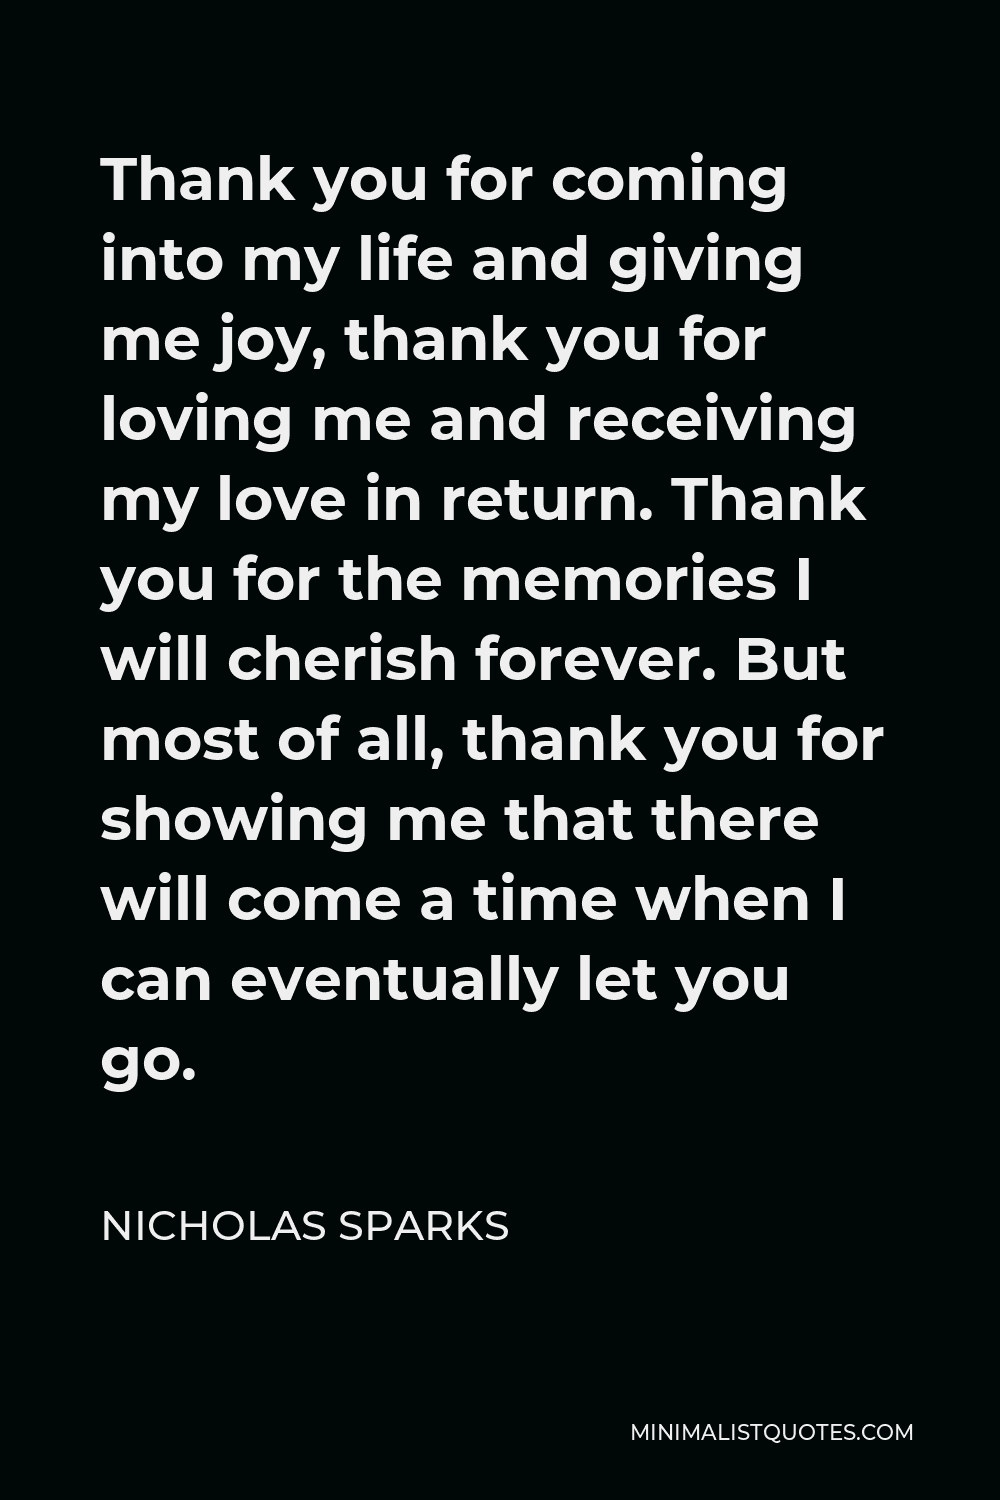 Nicholas Sparks Quote Thank You For Coming Into My Life And Giving Me Joy Thank You For Loving Me And Receiving My Love In Return Thank You For The Memories I Will